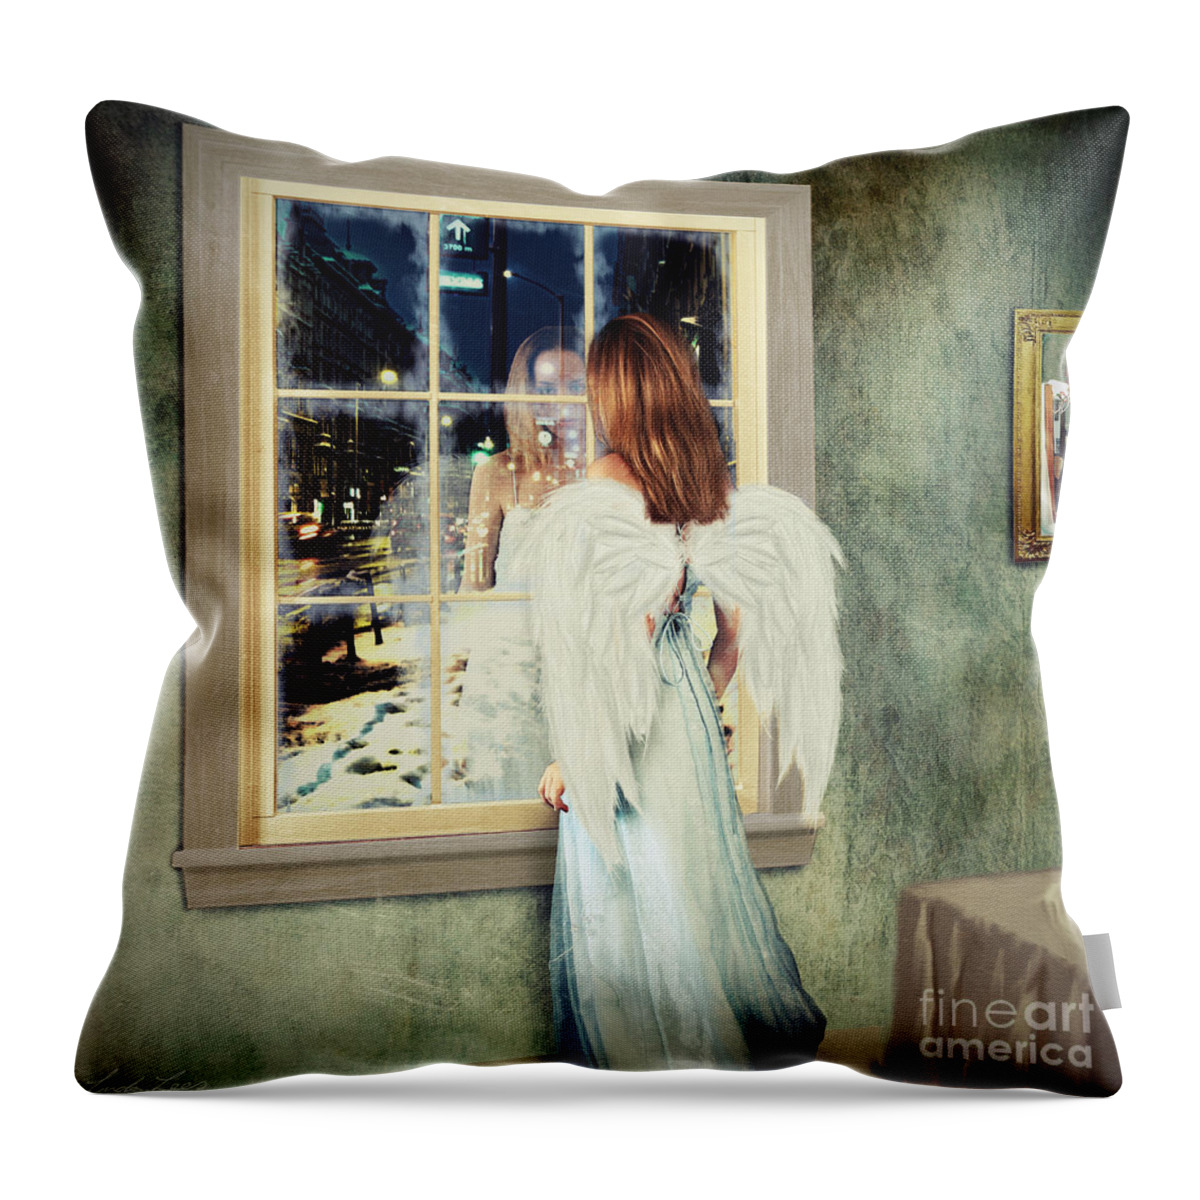 Angel Throw Pillow featuring the digital art Too Cold for Angels by Linda Lees